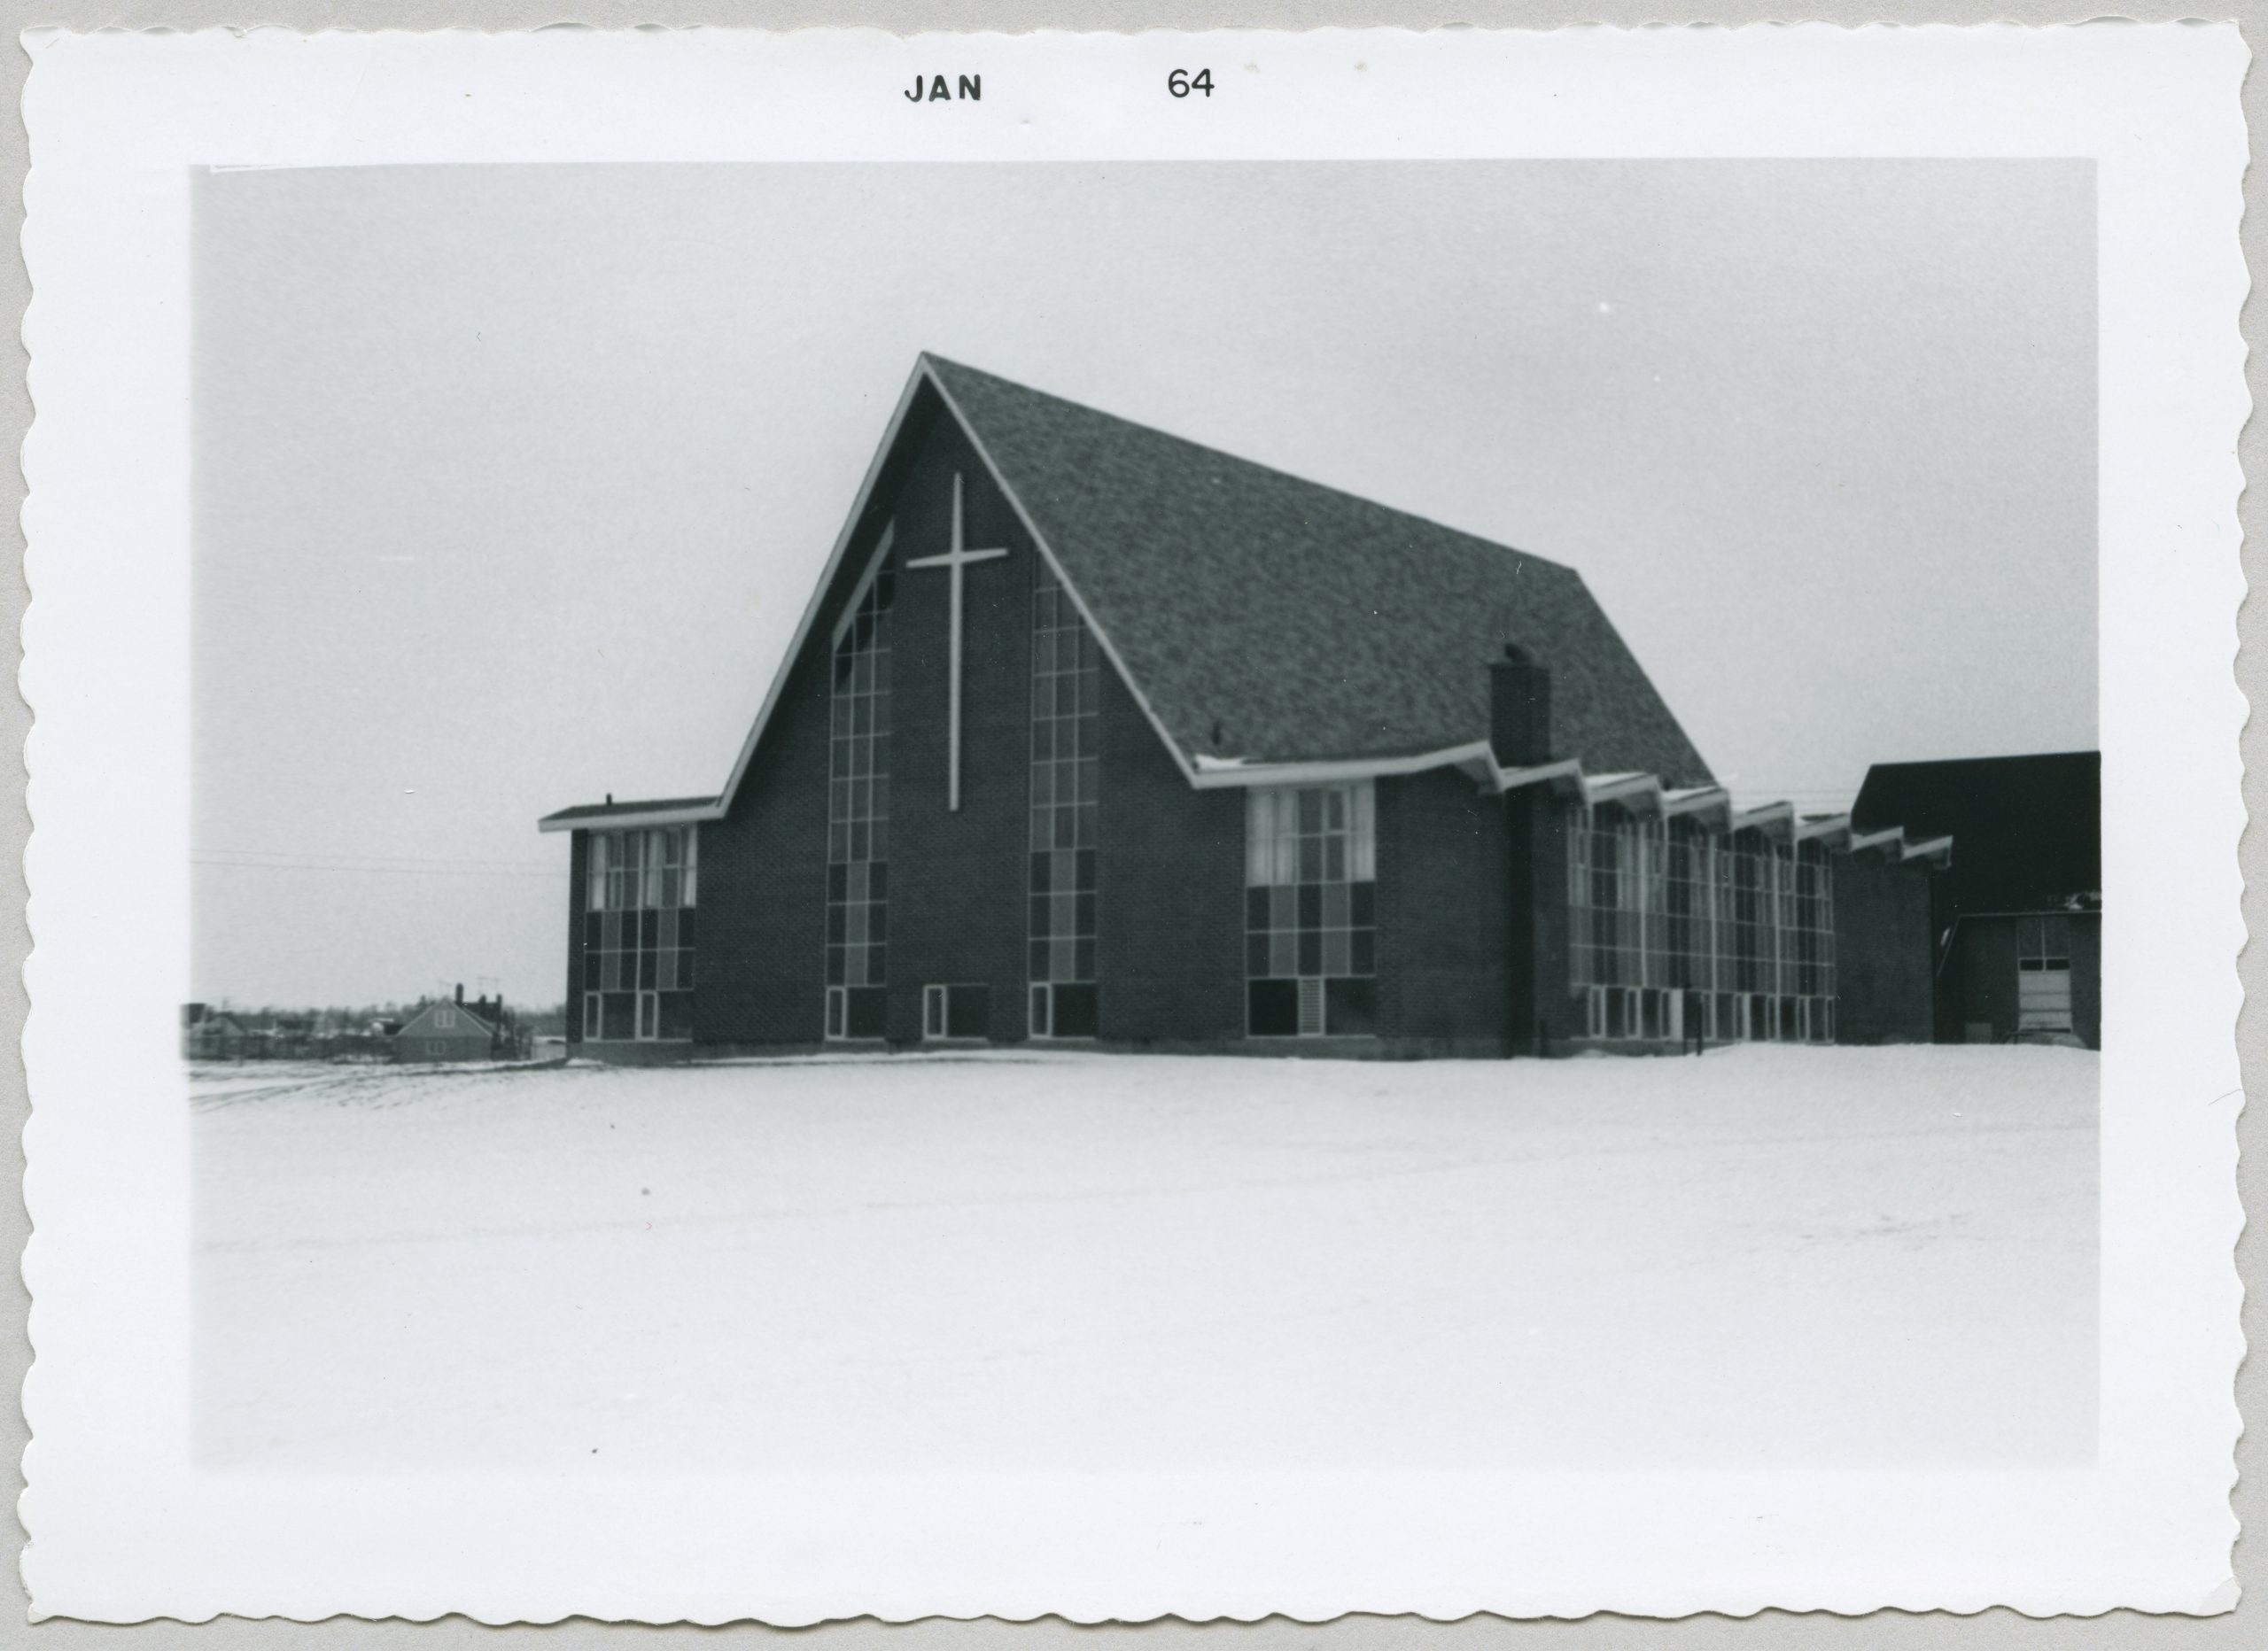 Church from the front during winter